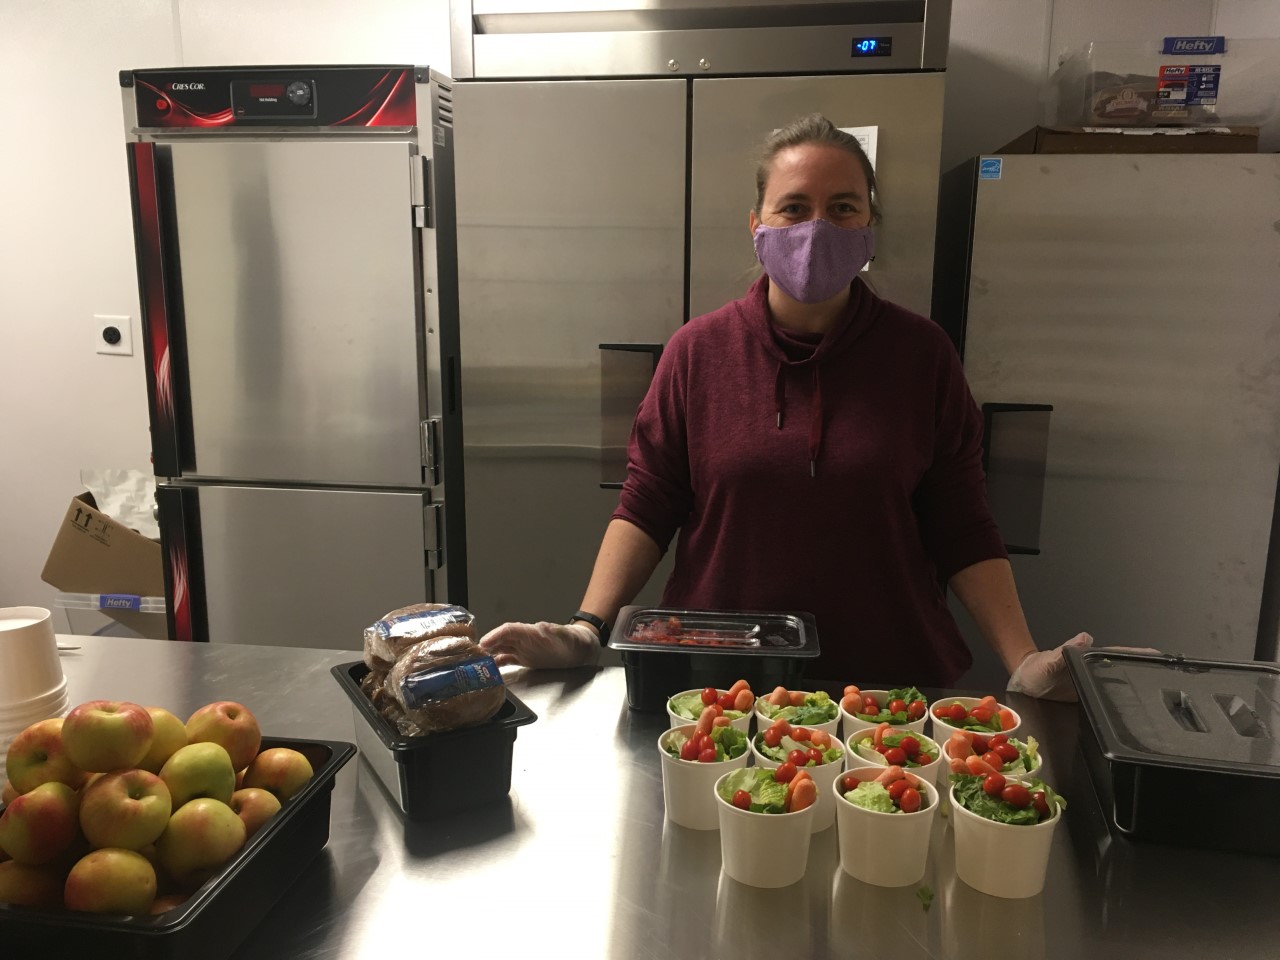 Child nutrition staff member shows off salads at Livermore Elementary